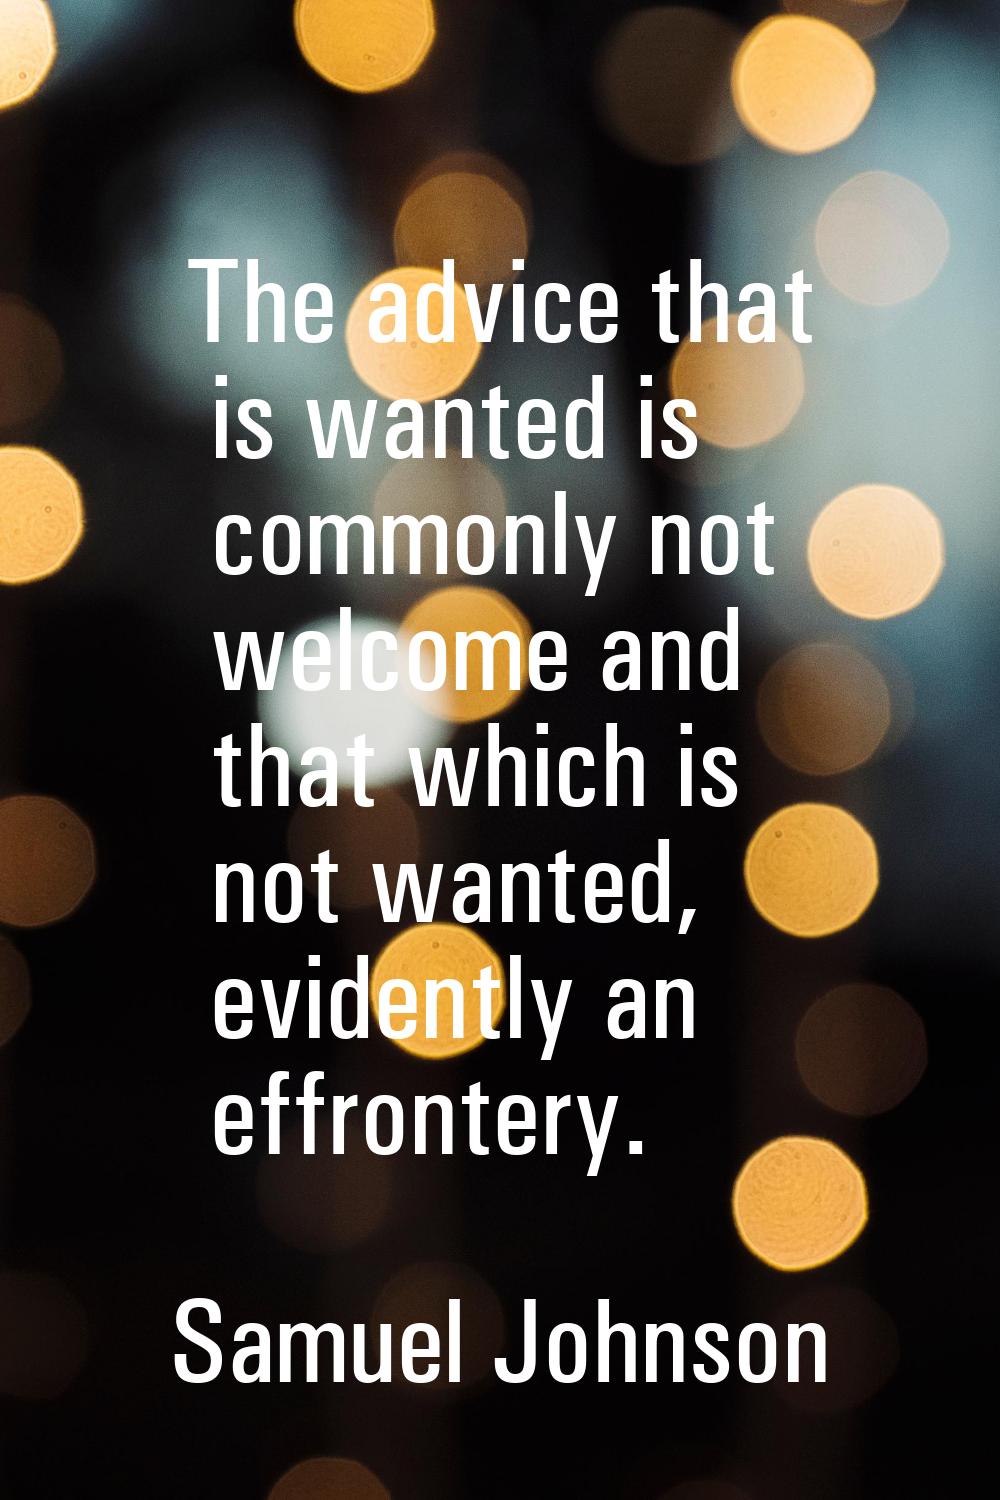 The advice that is wanted is commonly not welcome and that which is not wanted, evidently an effron